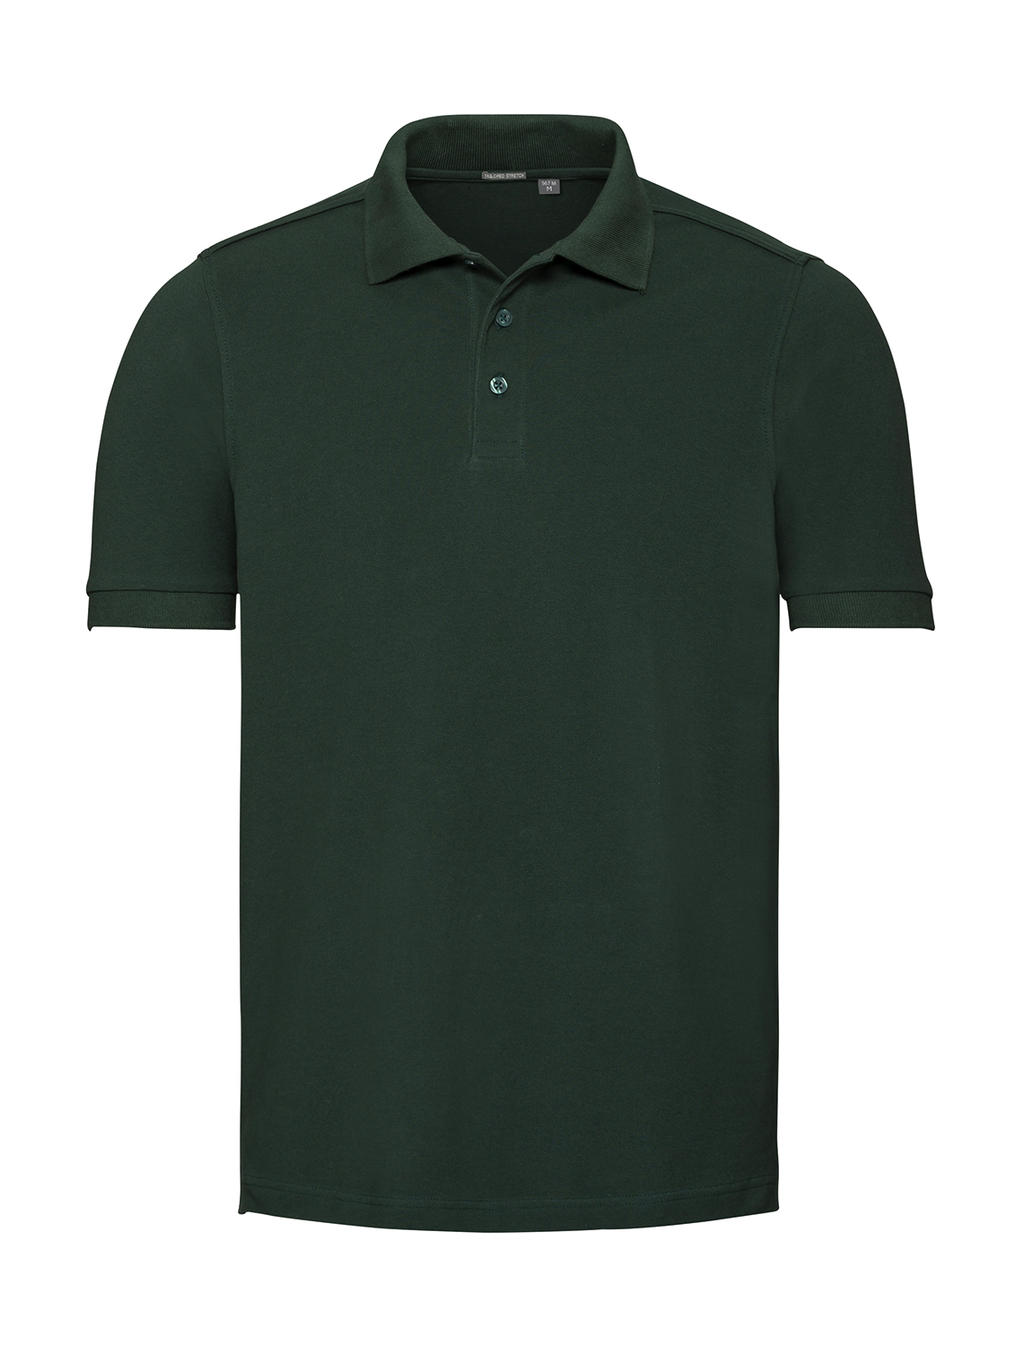  Mens Tailored Stretch Polo in Farbe Bottle Green